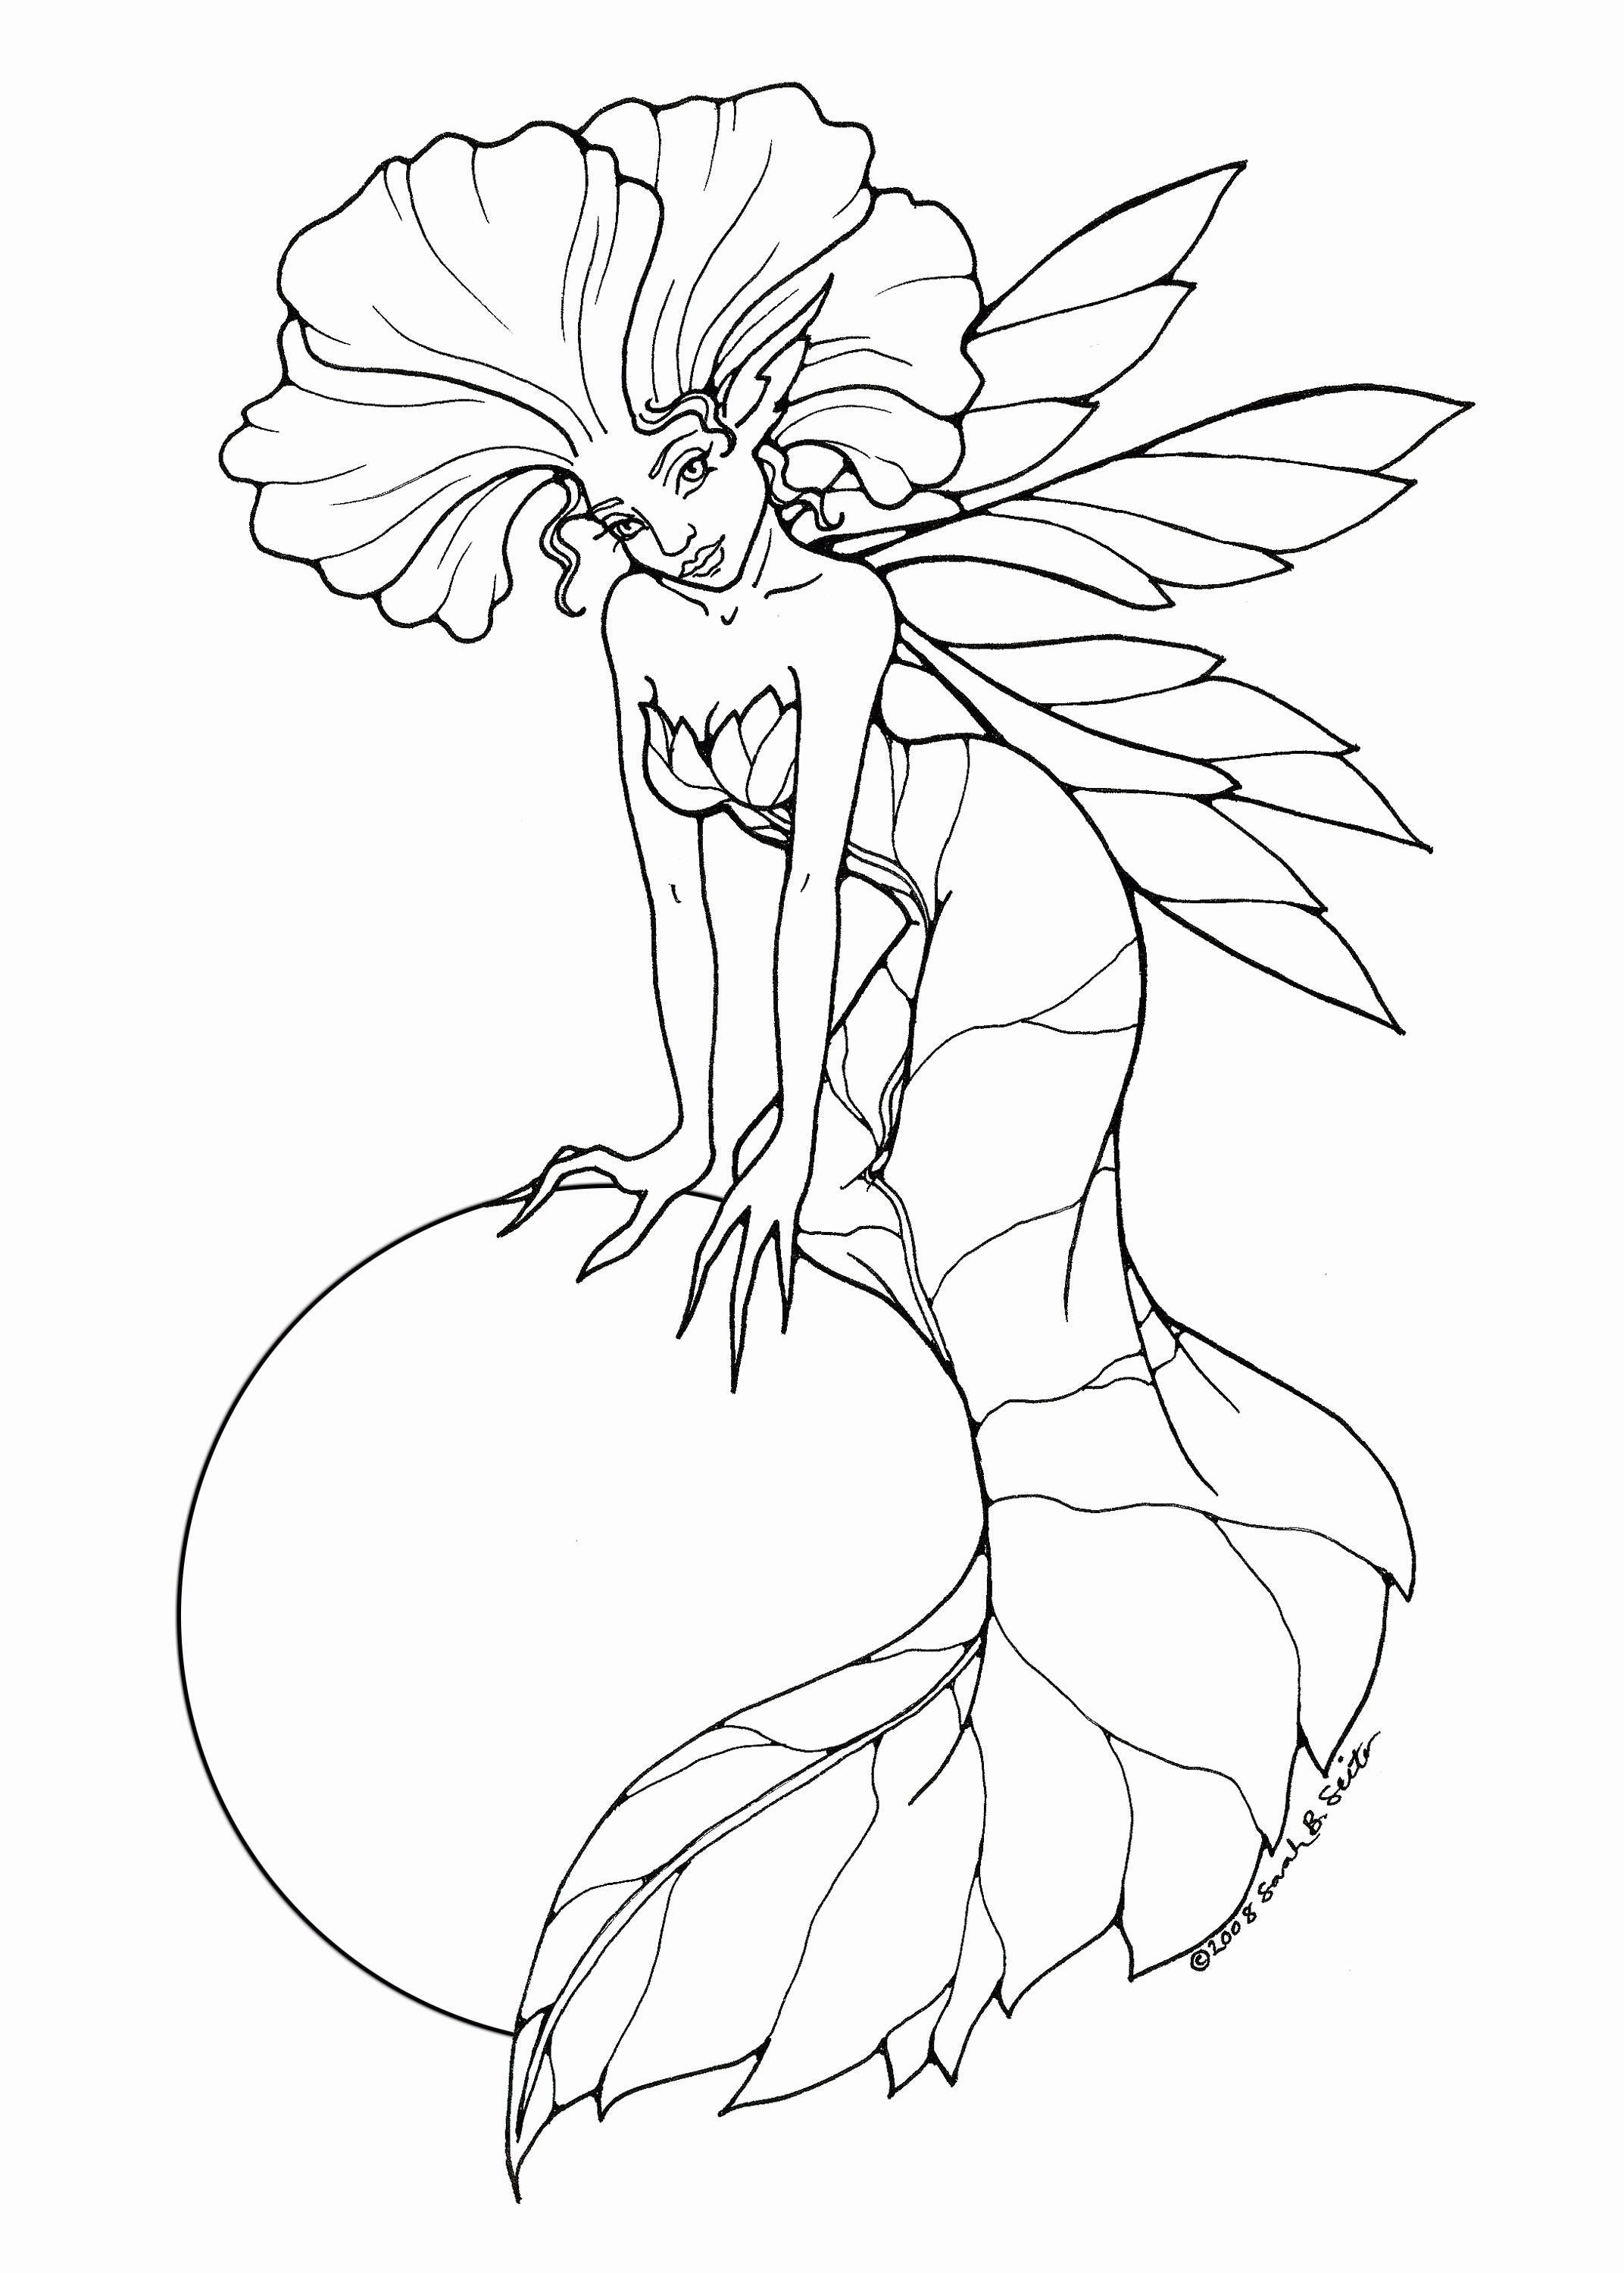 Basic Fairy Coloring Pages For Adults To Download And Print For ...